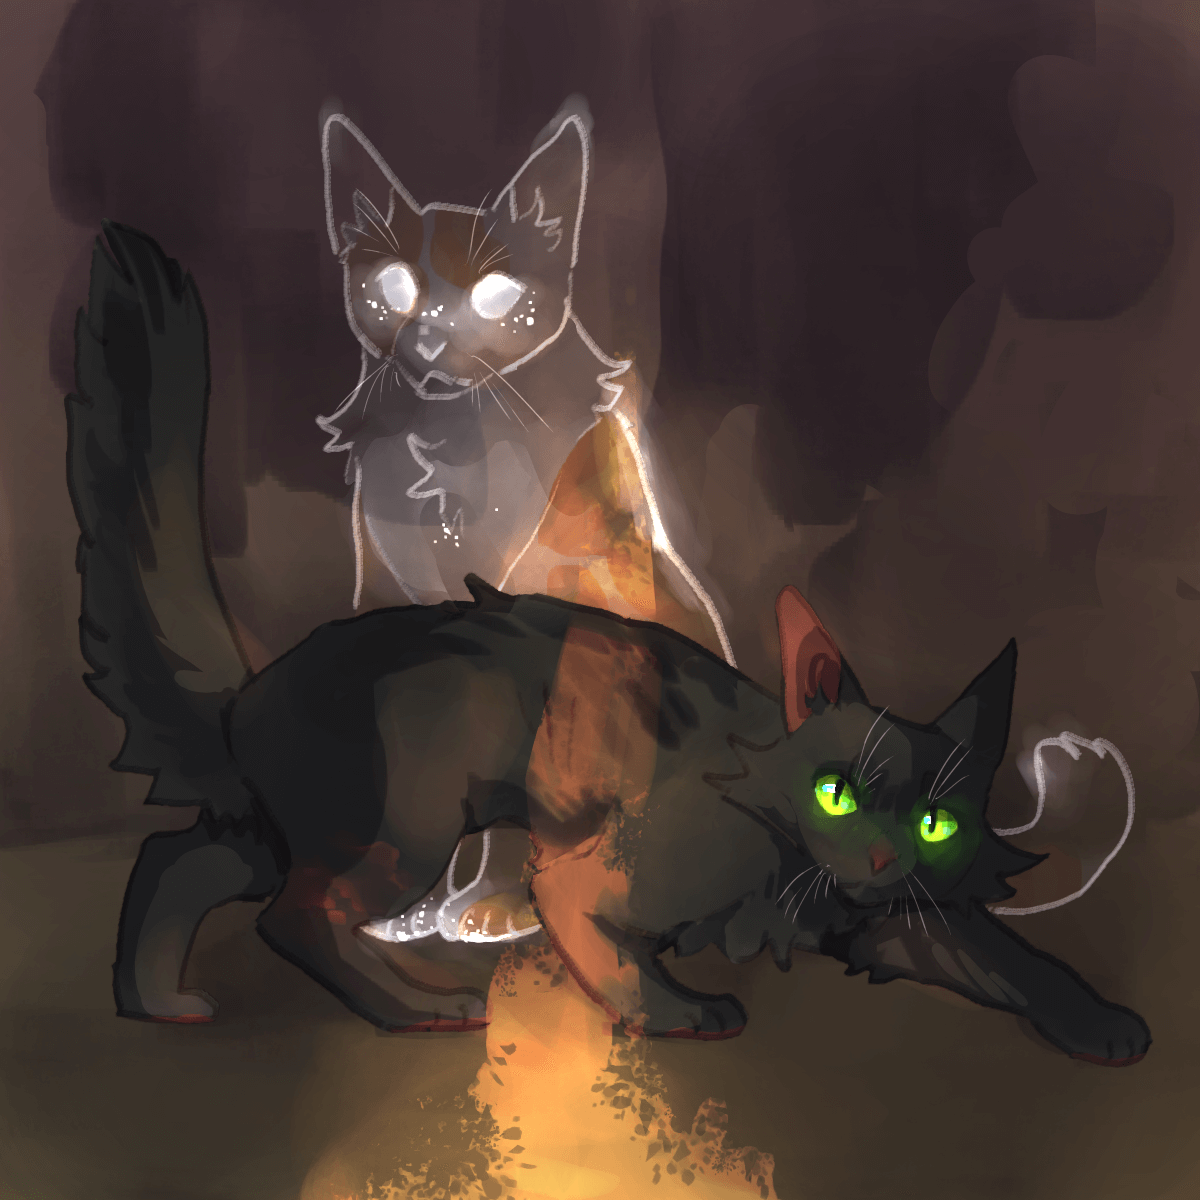 a drawing of hollyleaf and fallen leaves from warriors. they are in an entrance
		to the tunnels. a small sliver of light falls on hollyleaf. fallen leaves is sitting behind her.